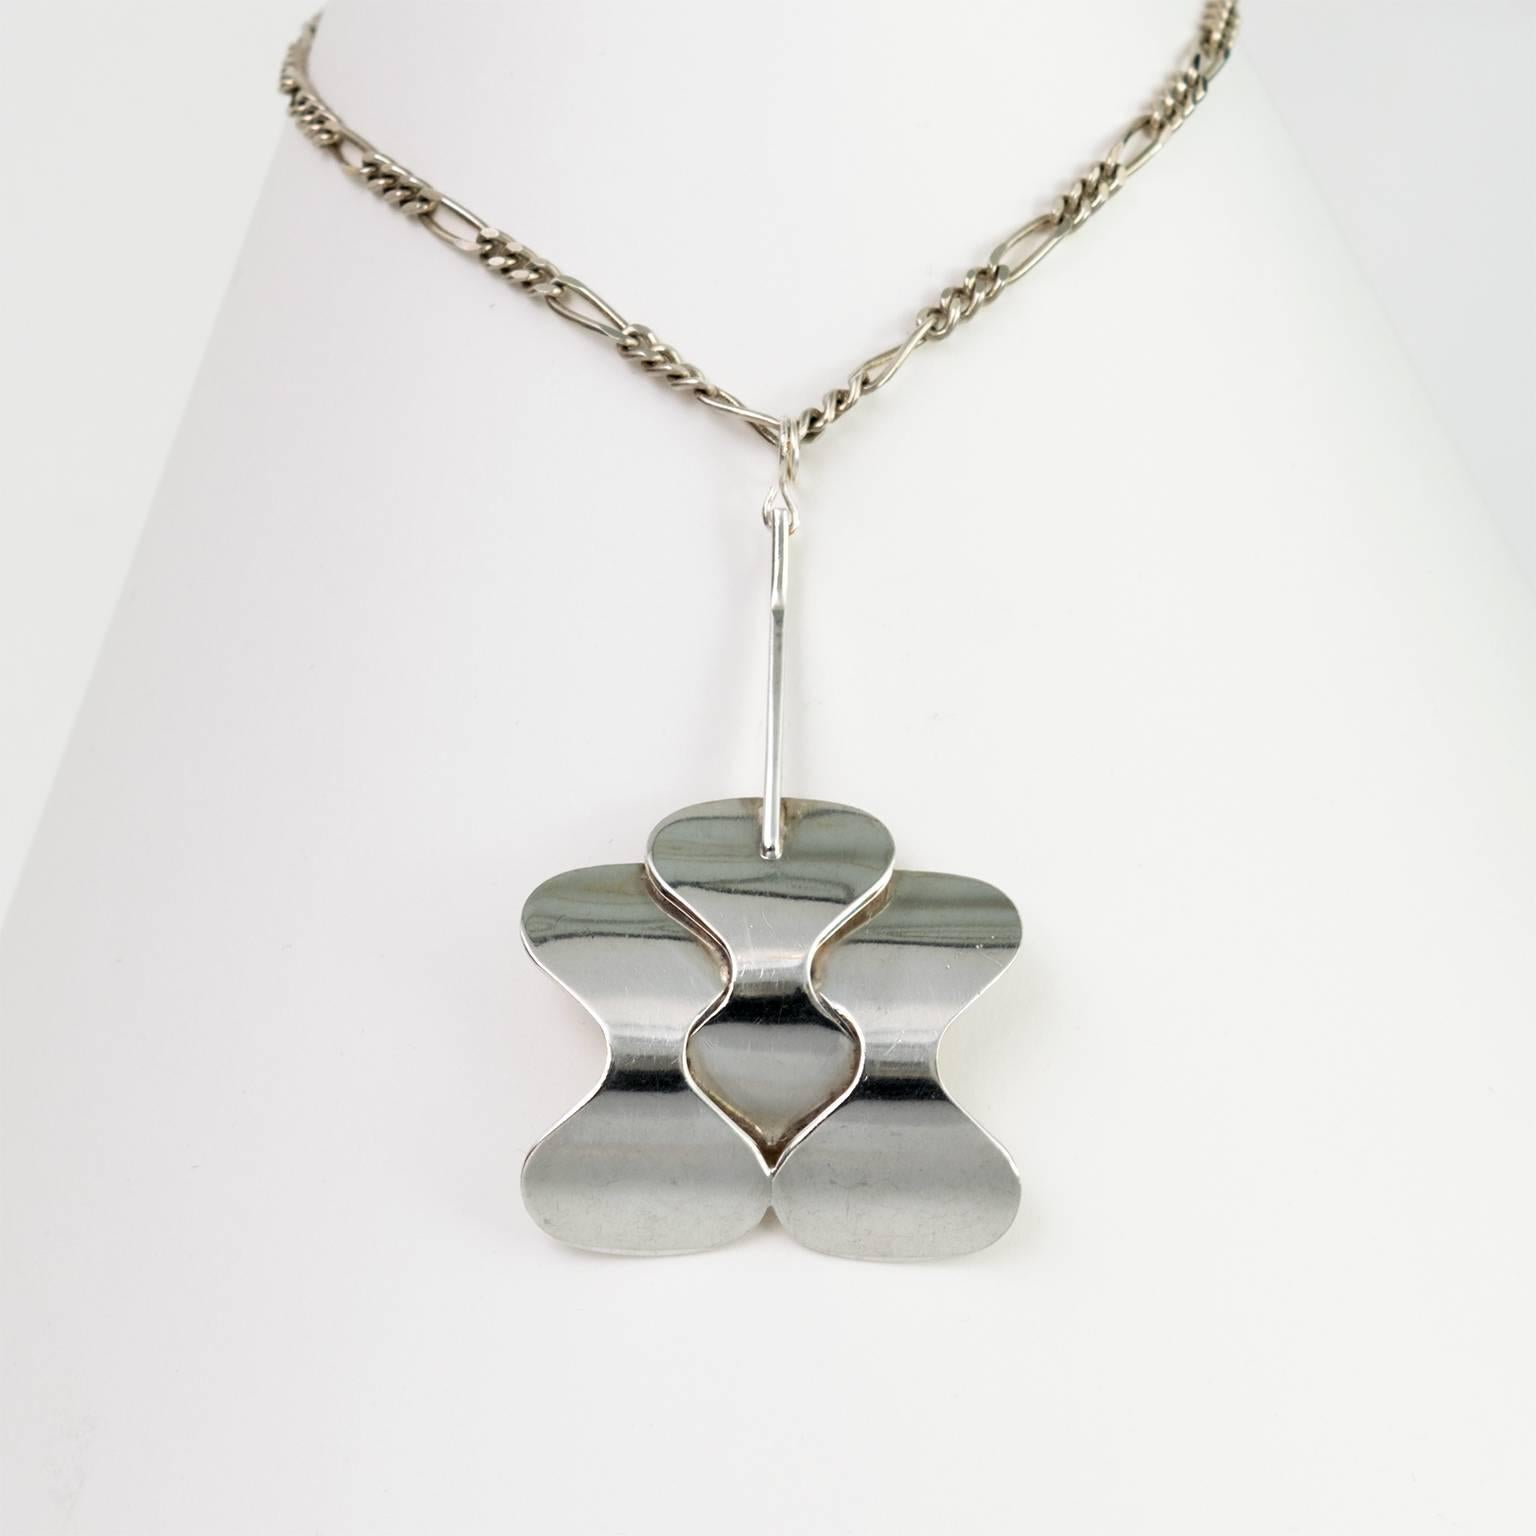 Silver Scandinavian Modern pendant with three soft curves shapes and silver chain from Hopeajaloste OY., Helsinki, Finland.
 
Chain length: 26".
Pendant height: 2.75".